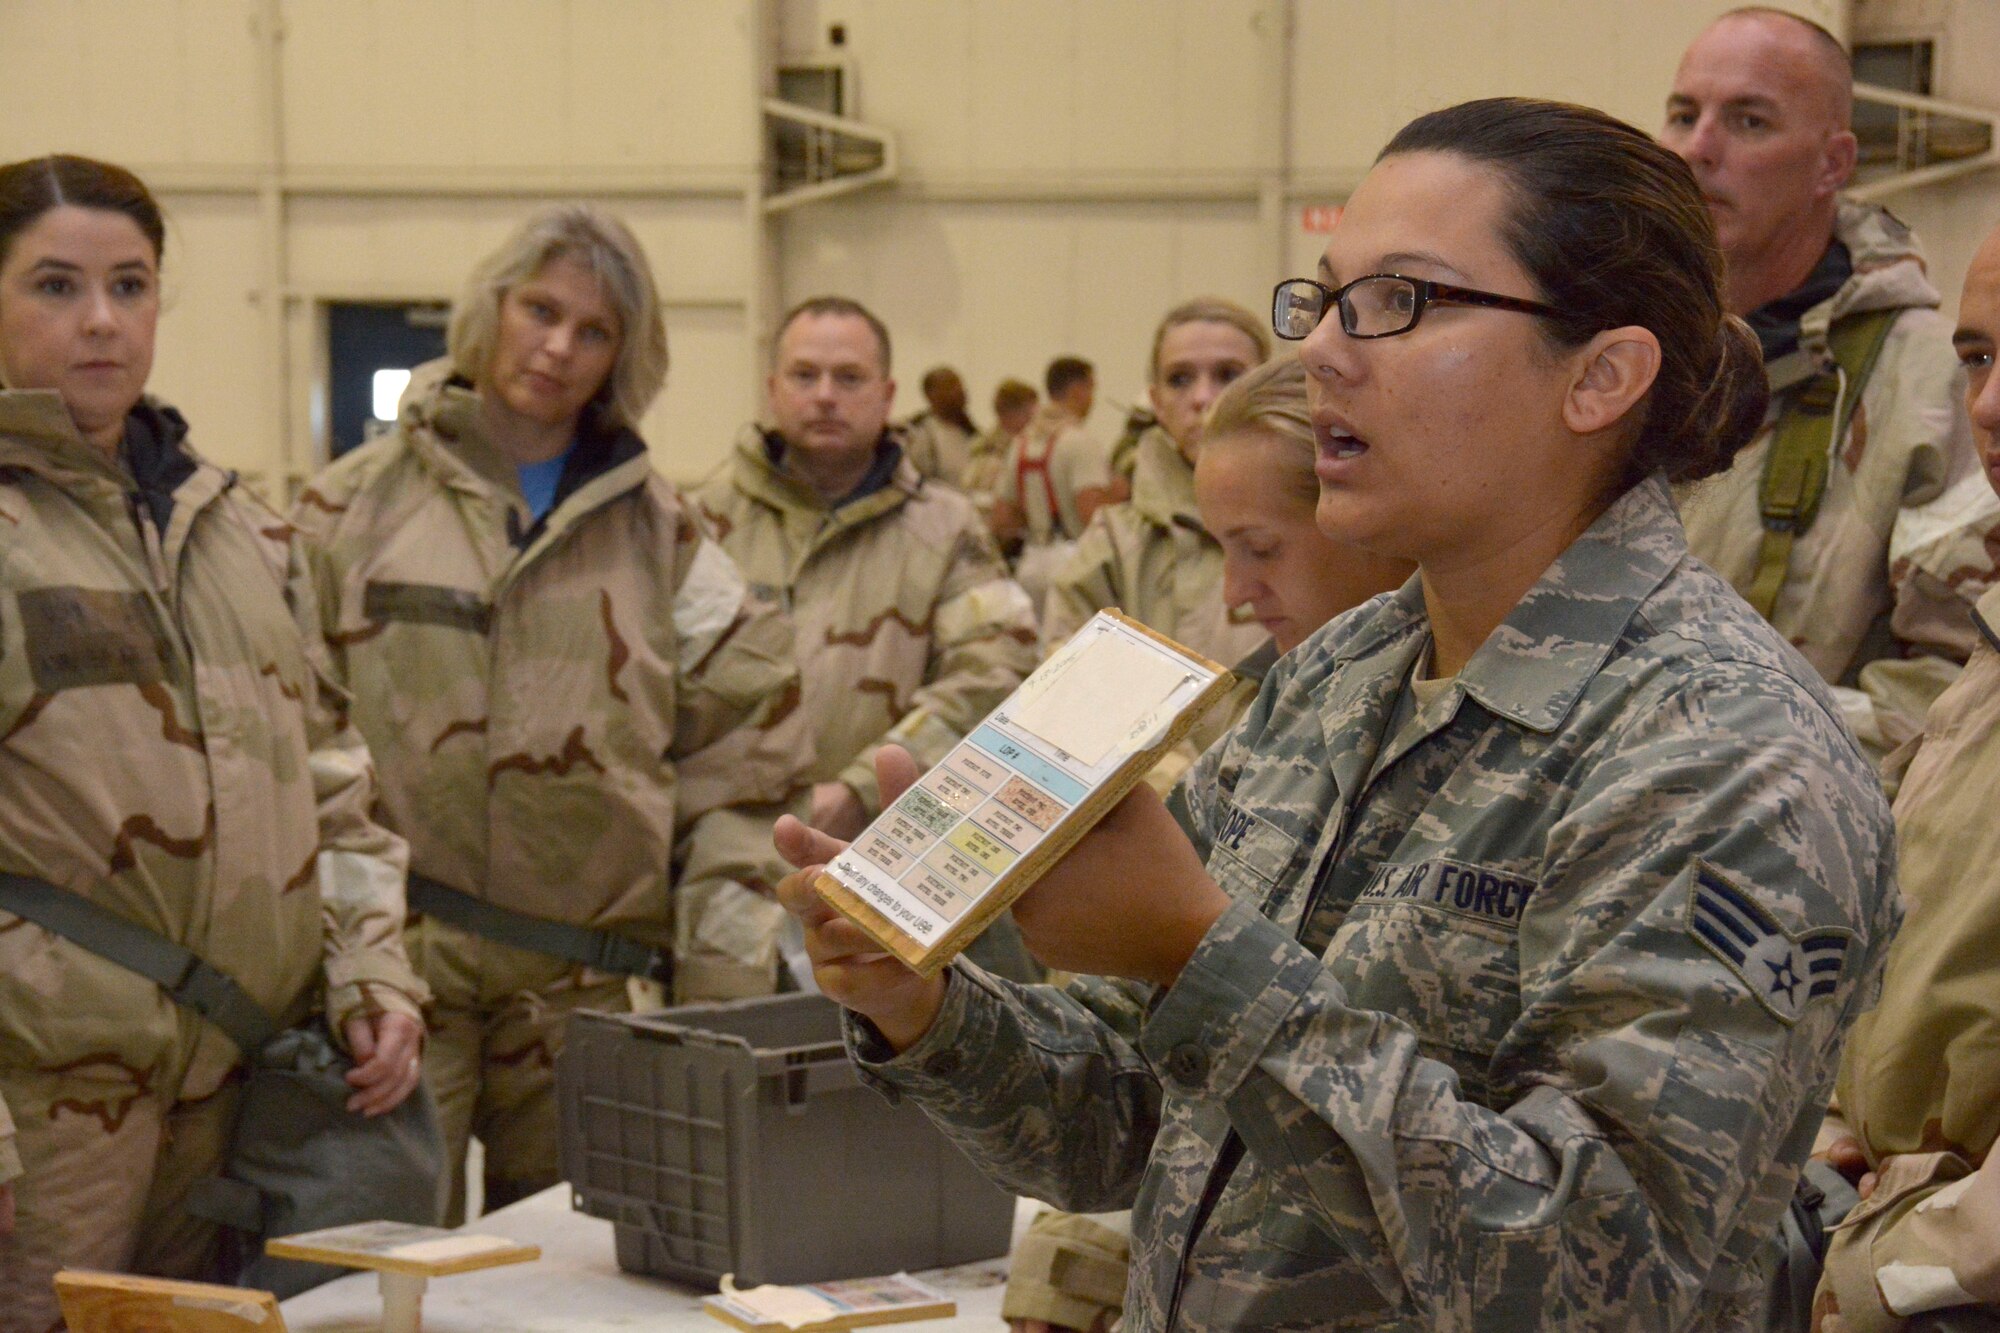 U.S. Air Force Cori Pope, a member of the 145th Airlift Wing, Emergency Management team, gives a hands-on demonstration of special m-8 and 9 chemical detection papers during the Air Expeditionary Skills Rodeo, held Sept. 13, 2015 in a hangar at the North Carolina Air National Guard Base, Charlotte Douglas International Airport. The detection paper alerts members to any fallen and still lingering chemicals that may be in the area during and after a chemical attack. (U.S. Air National Guard photo by Senior Airman Laura Montgomery, 145th Public Affairs/Released)